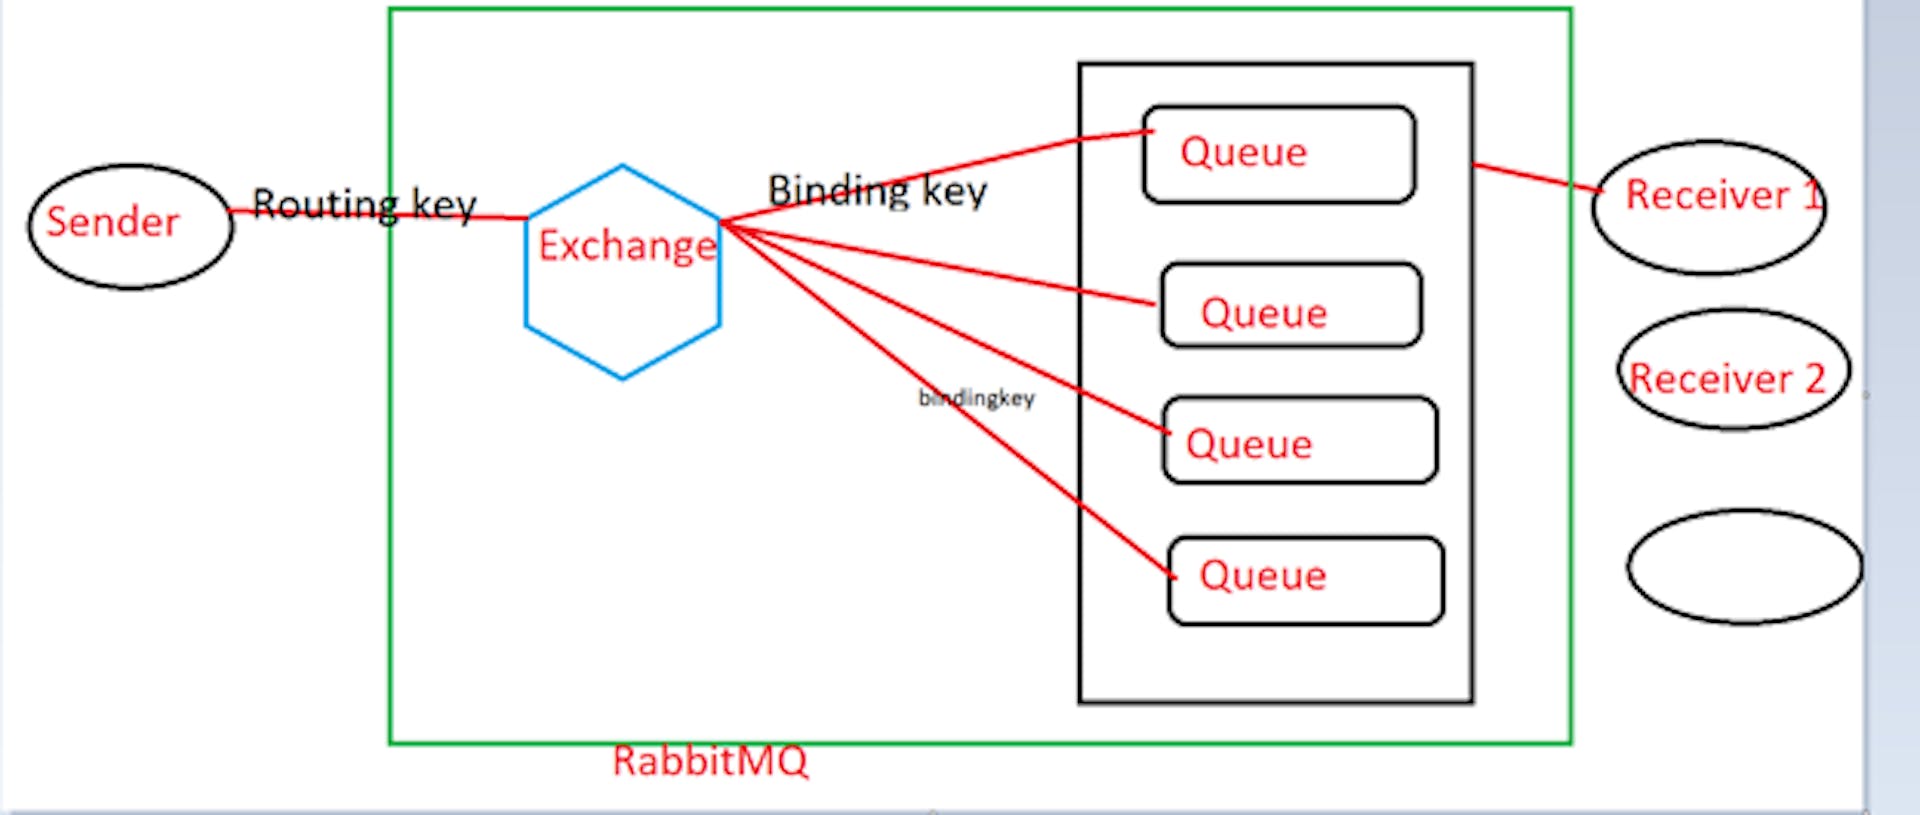 The exchange receives the messages from the sender with a "Routing key"